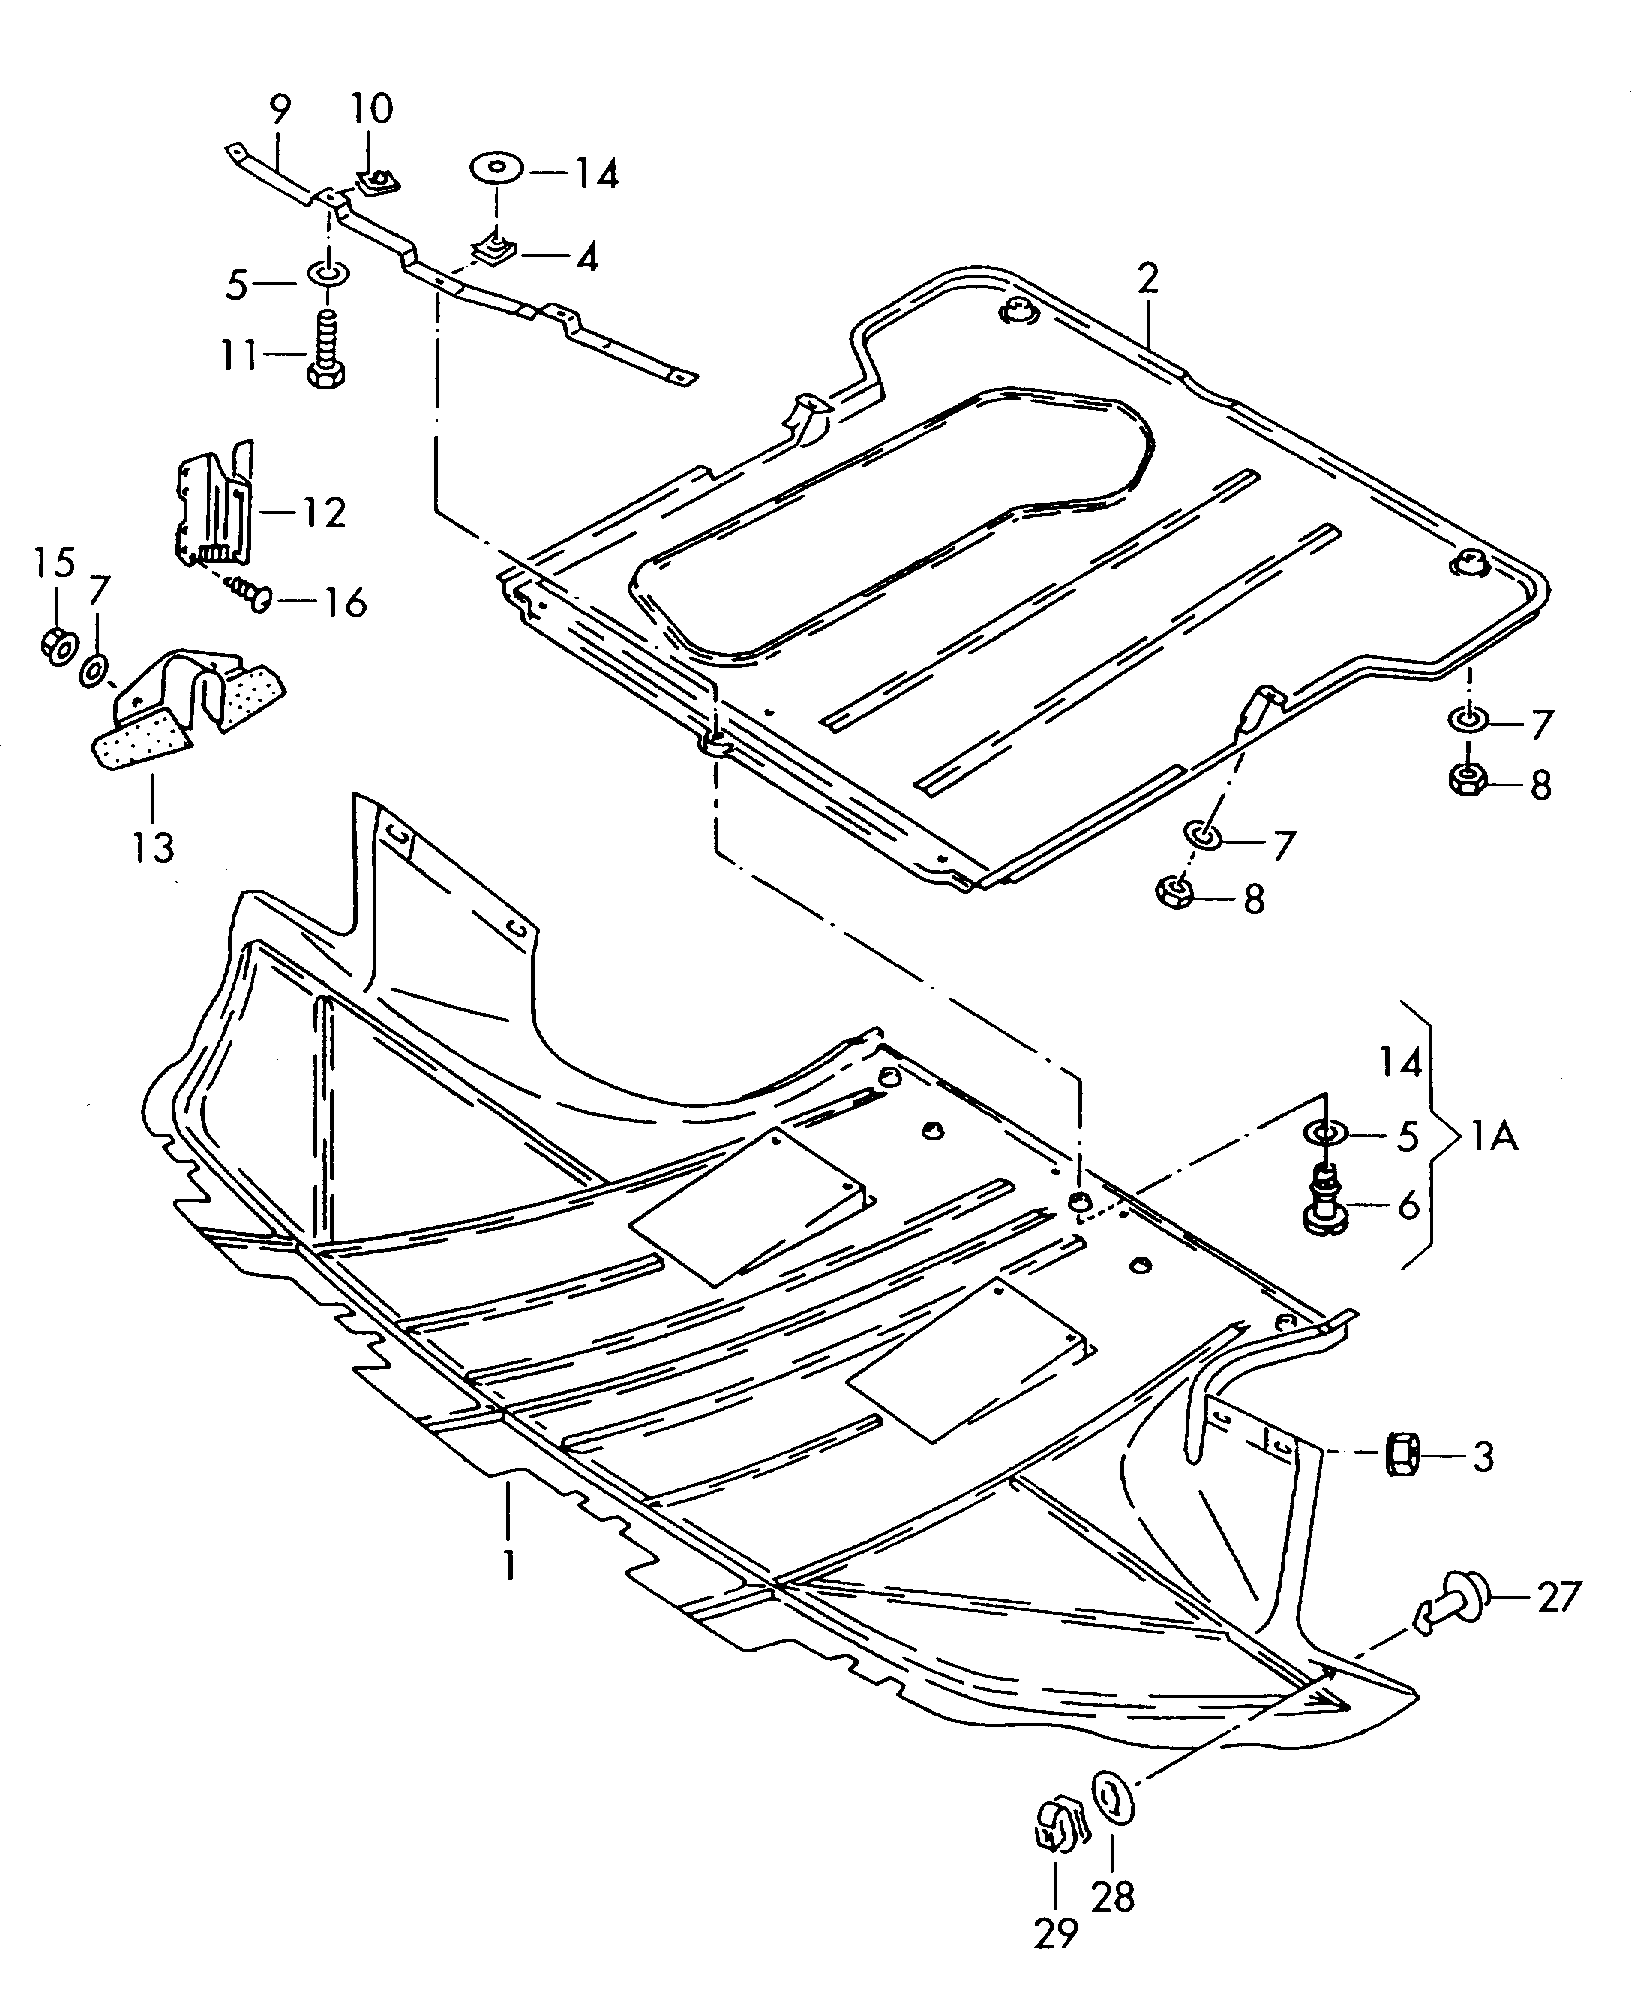 noise insulation; cover for jointed shaft - Audi Cabriolet(ACA)  